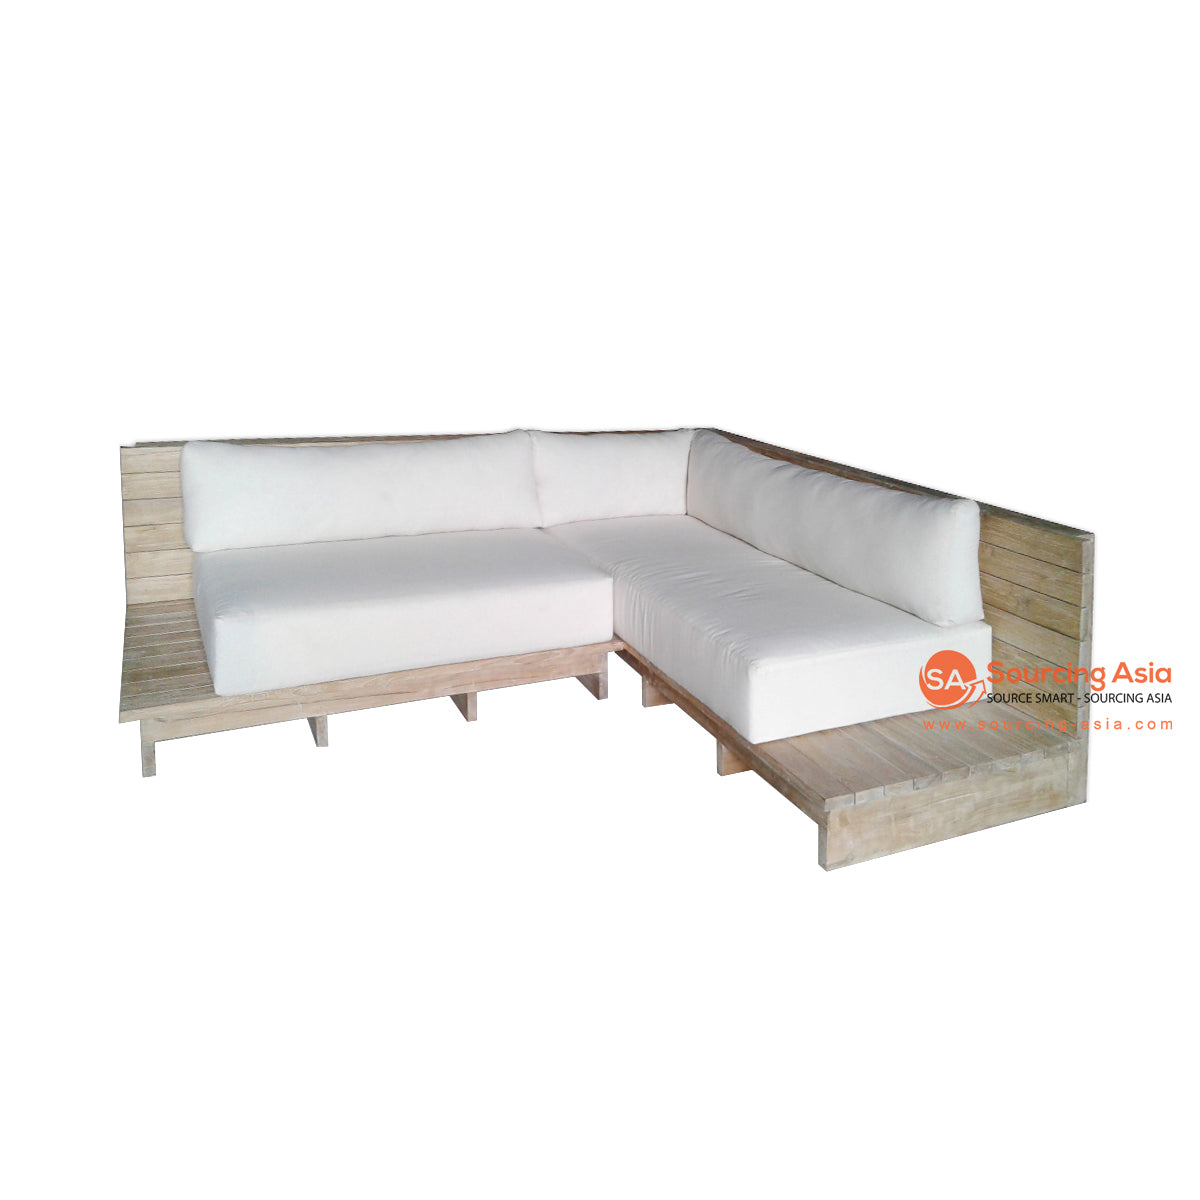 ECL049 NATURAL RECYCLED TEAK WOOD OUTDOOR MALDIVES CORNER LOUNGER SOFA (PRICE WITHOUT CUSHION)